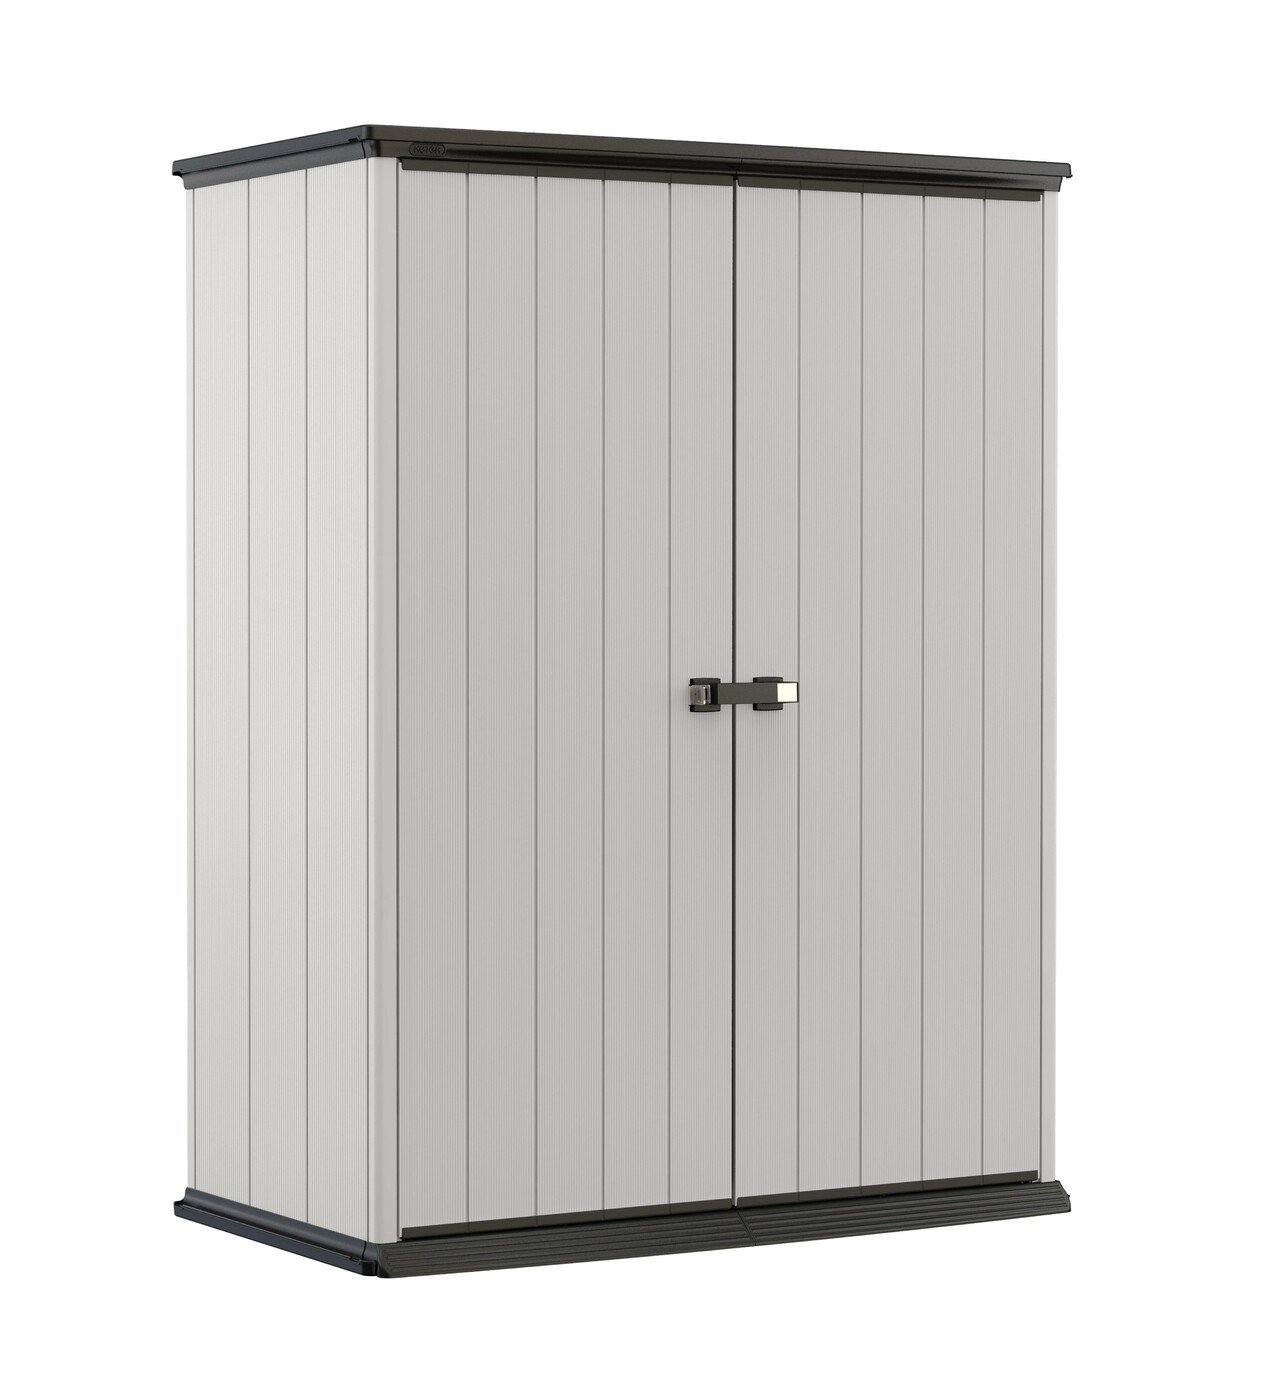 Keter Store It Out Premier High Store Shed 1500L - Grey